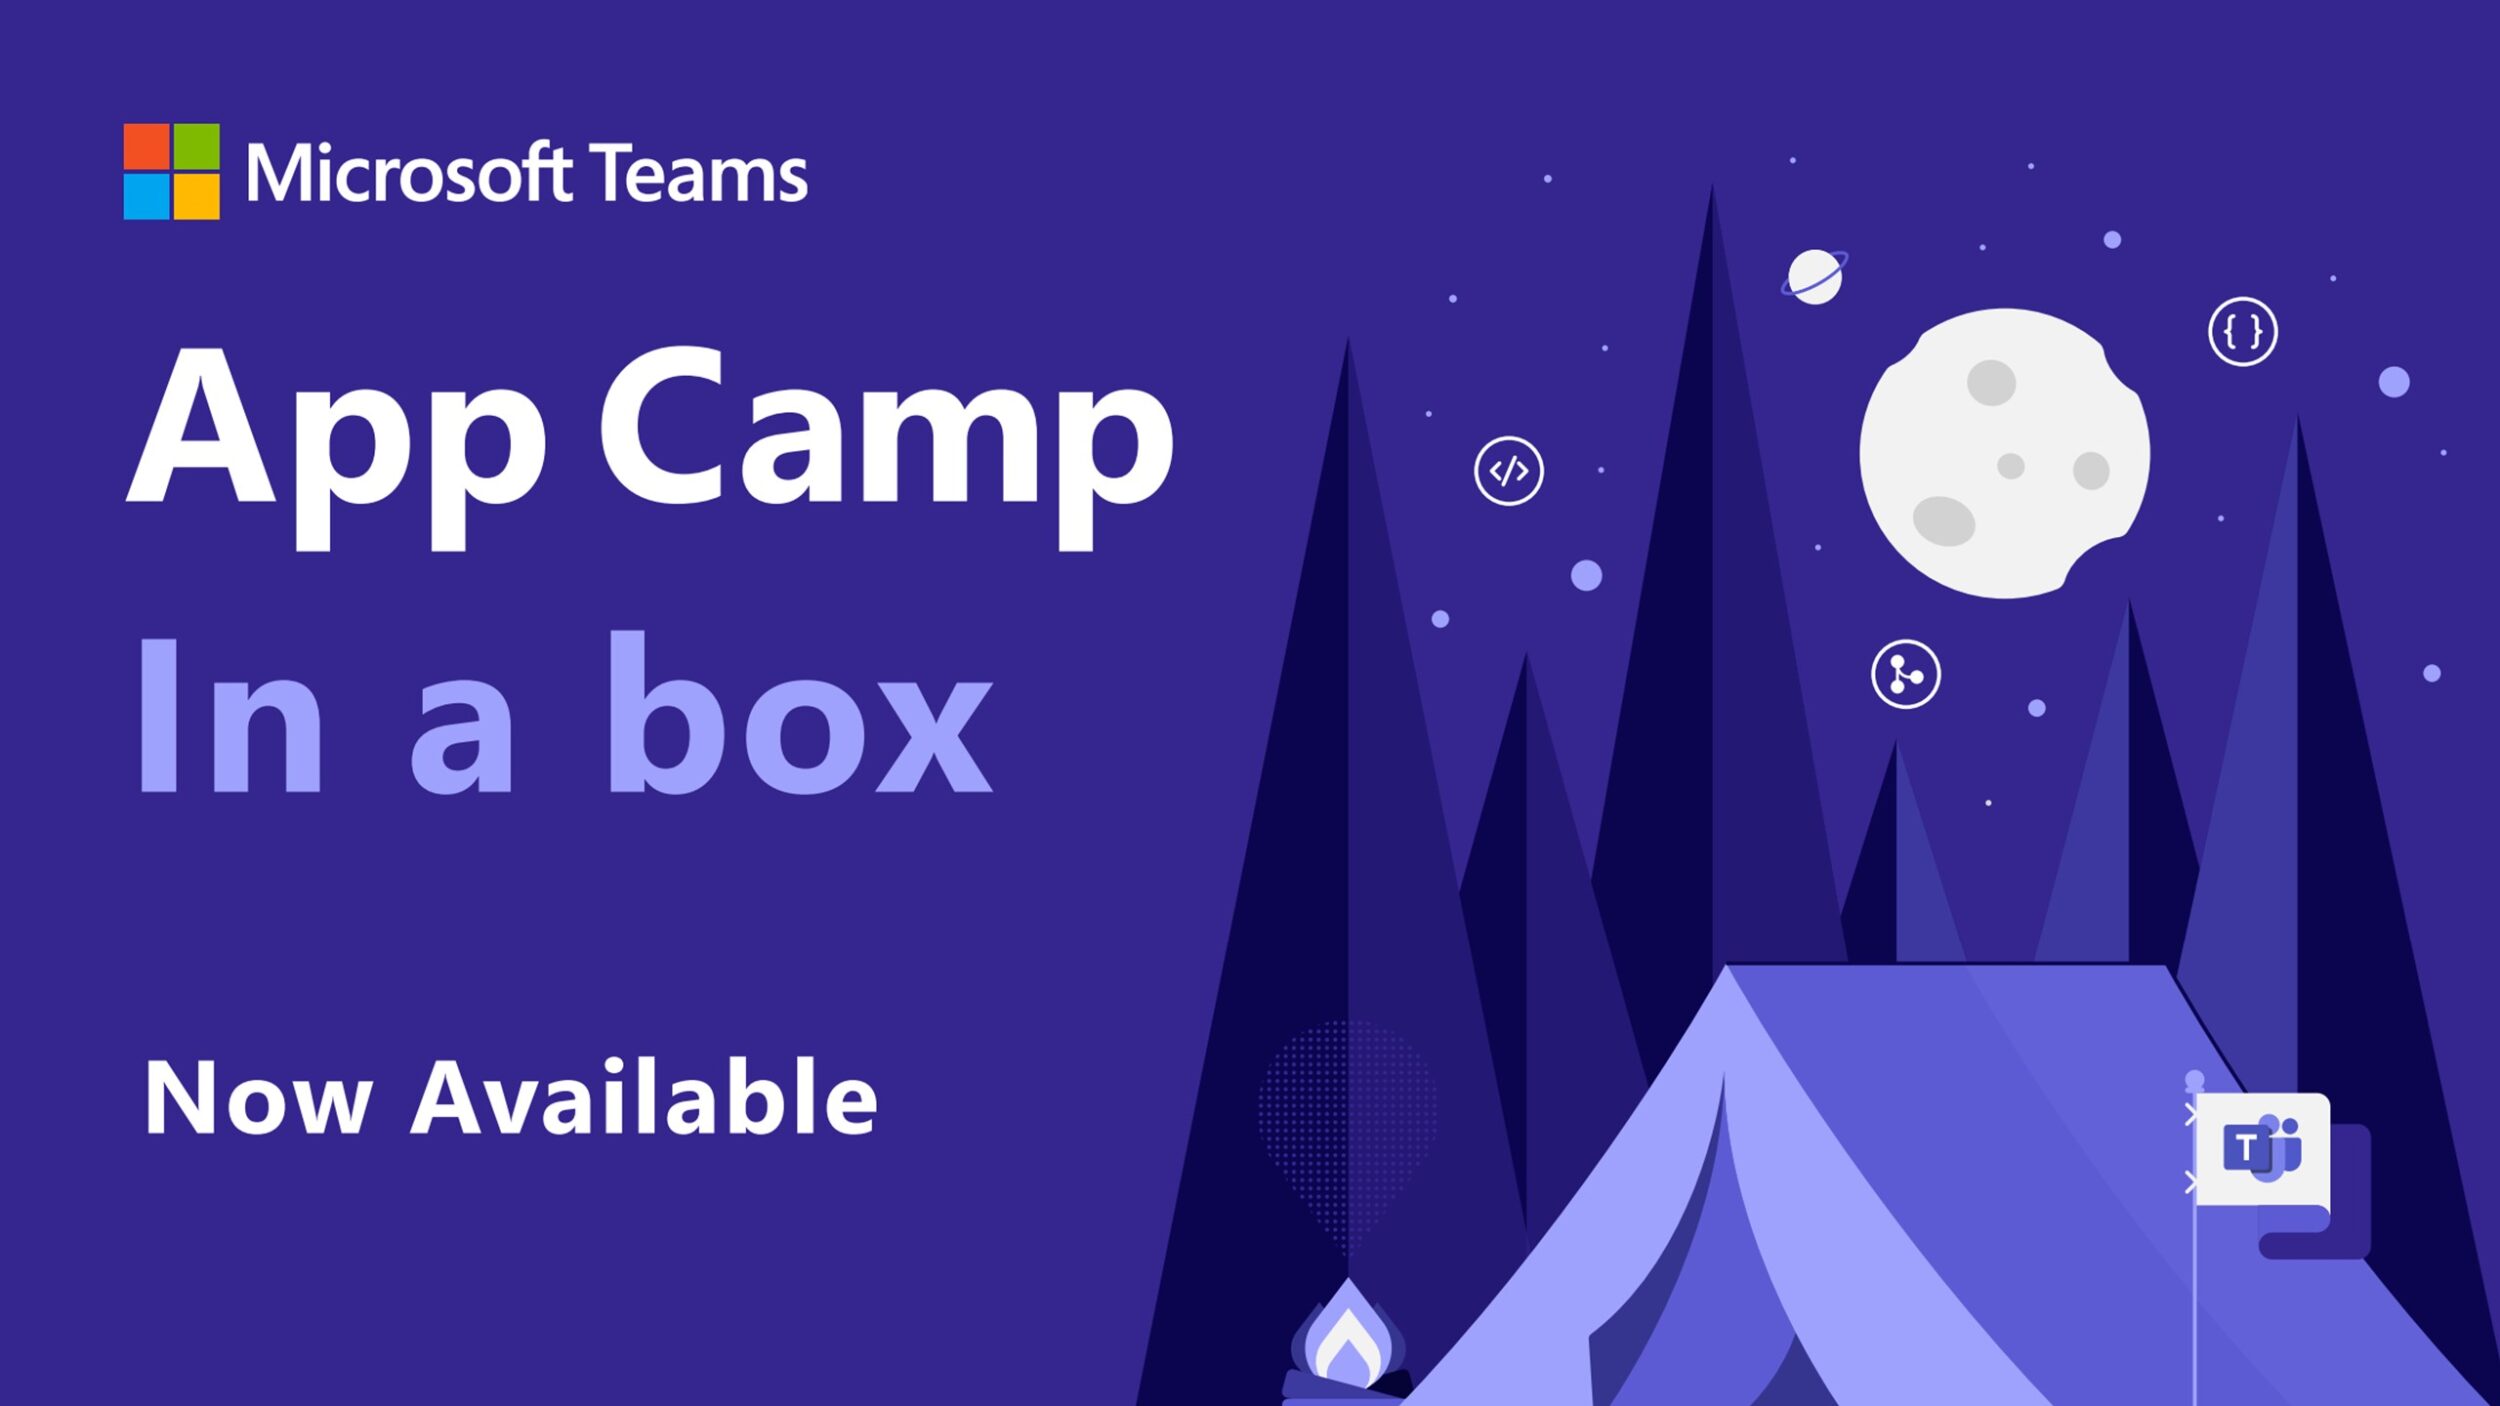 Microsoft Teams App Camp in a Box is now available